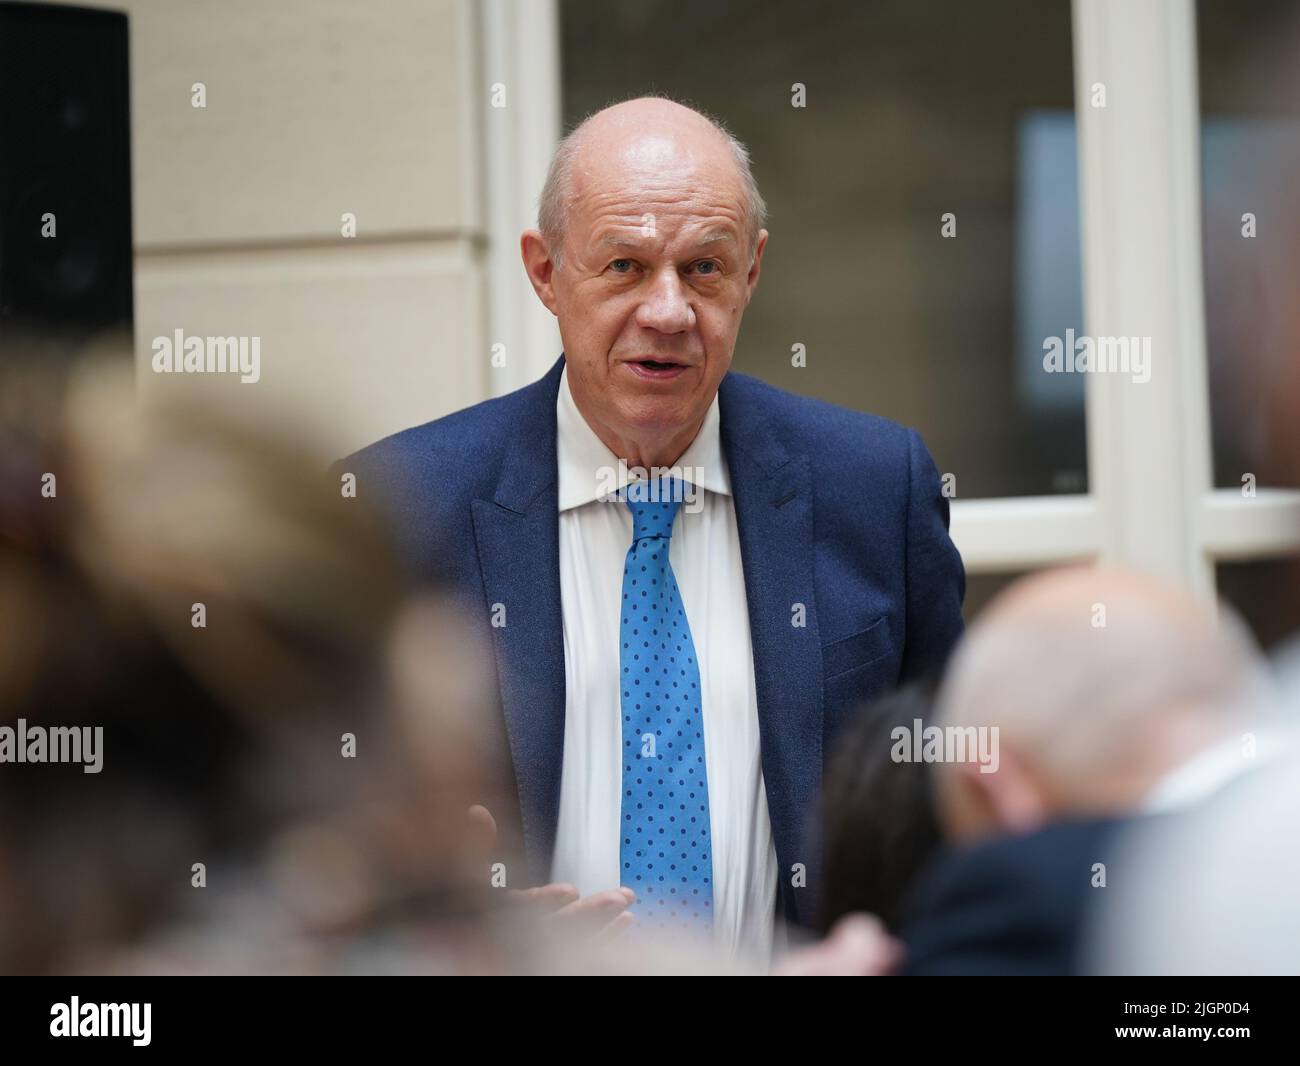 Damian Green at the launch of Tom Tugendhat's campaign to be Conservative Party leader and Prime Minister, at 4 Millbank, London. Picture date: Tuesday July 12, 2022. Stock Photo